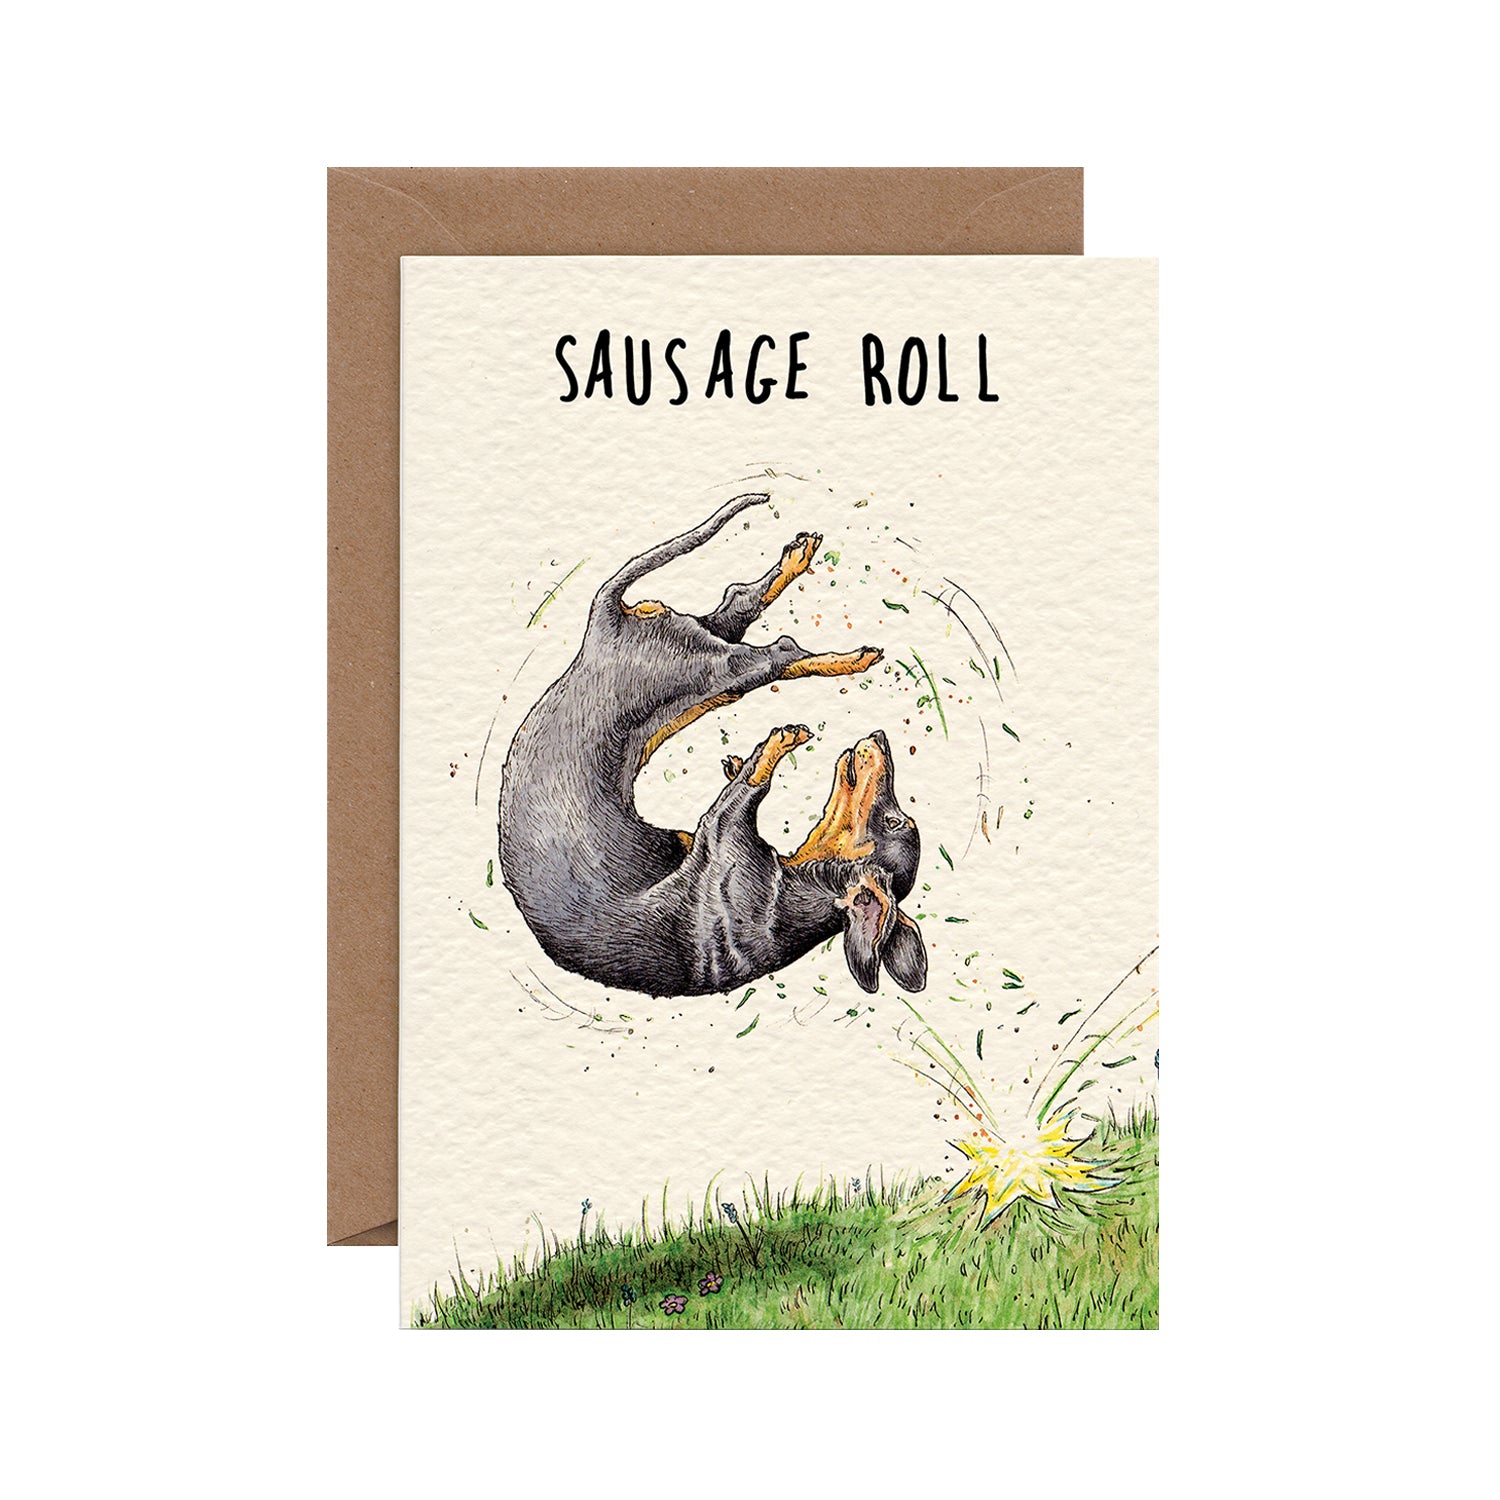 A funny illustration of a dachshund tumbling down a grassy hill, under the caption &quot;Sausage Roll&quot;.